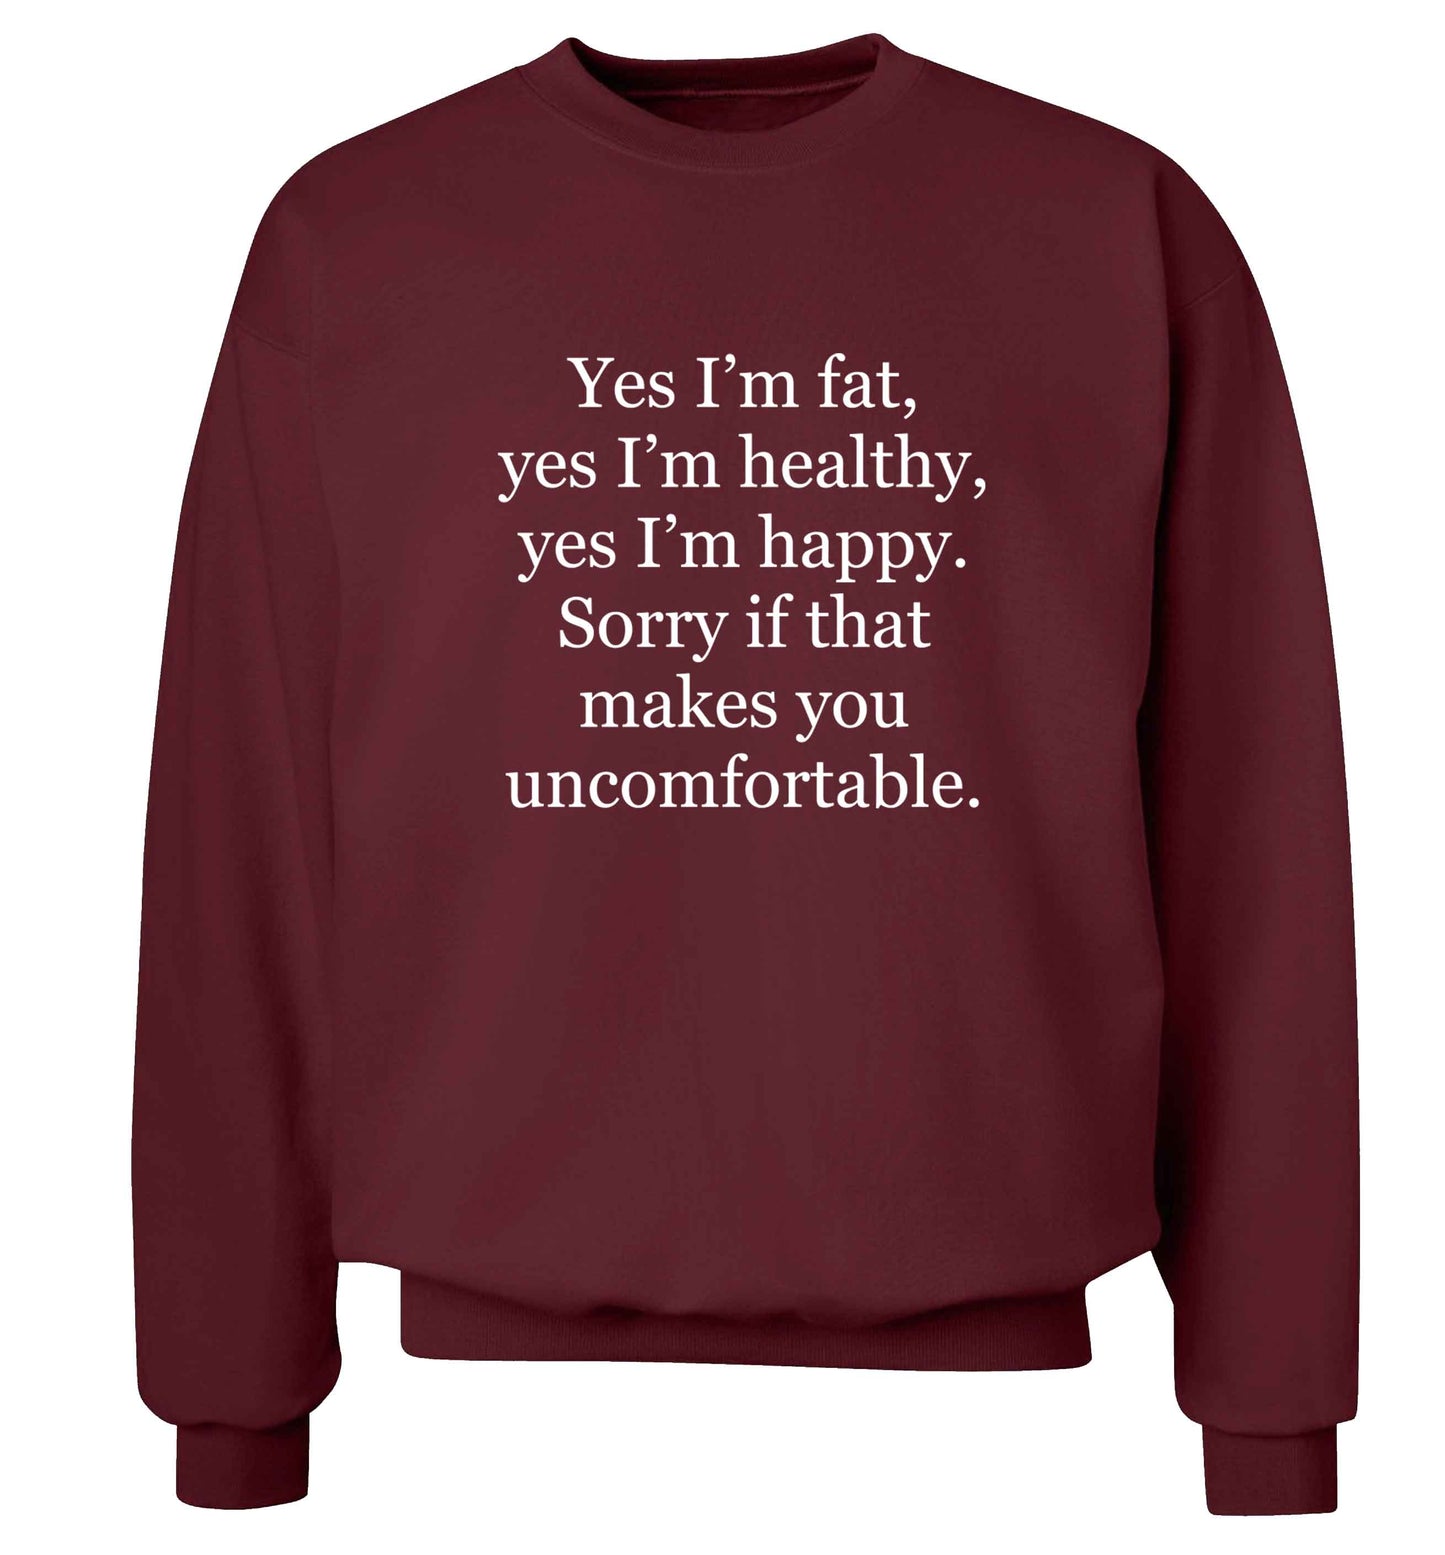 Yes I'm fat, yes I'm healthy, yes I'm happy. Sorry if that makes you uncomfortable adult's unisex maroon sweater 2XL